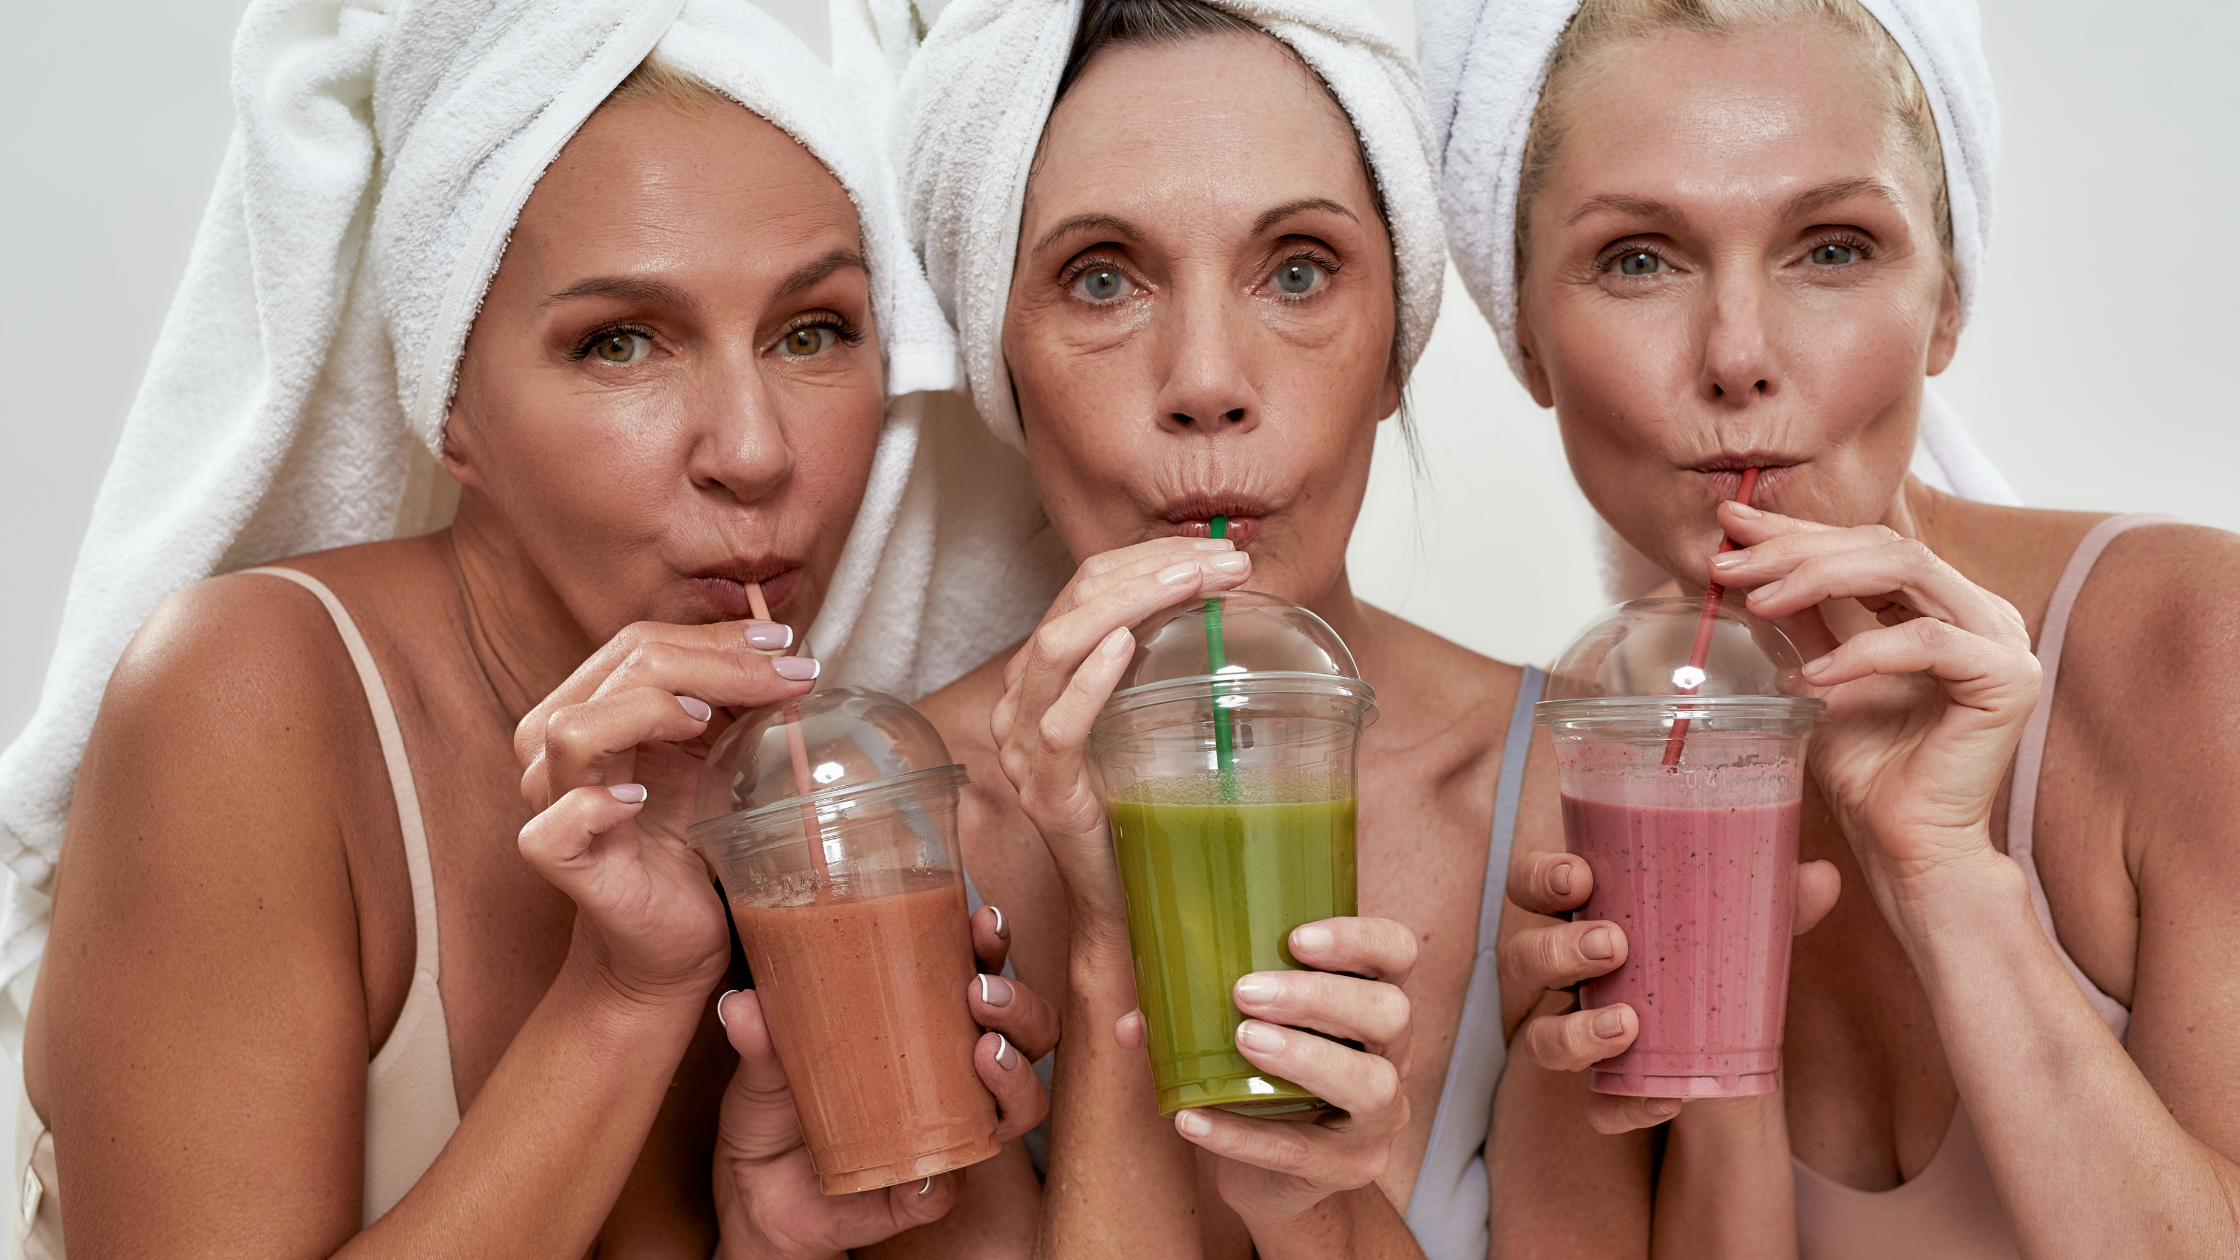 women with towels on their heads drinking smoothies